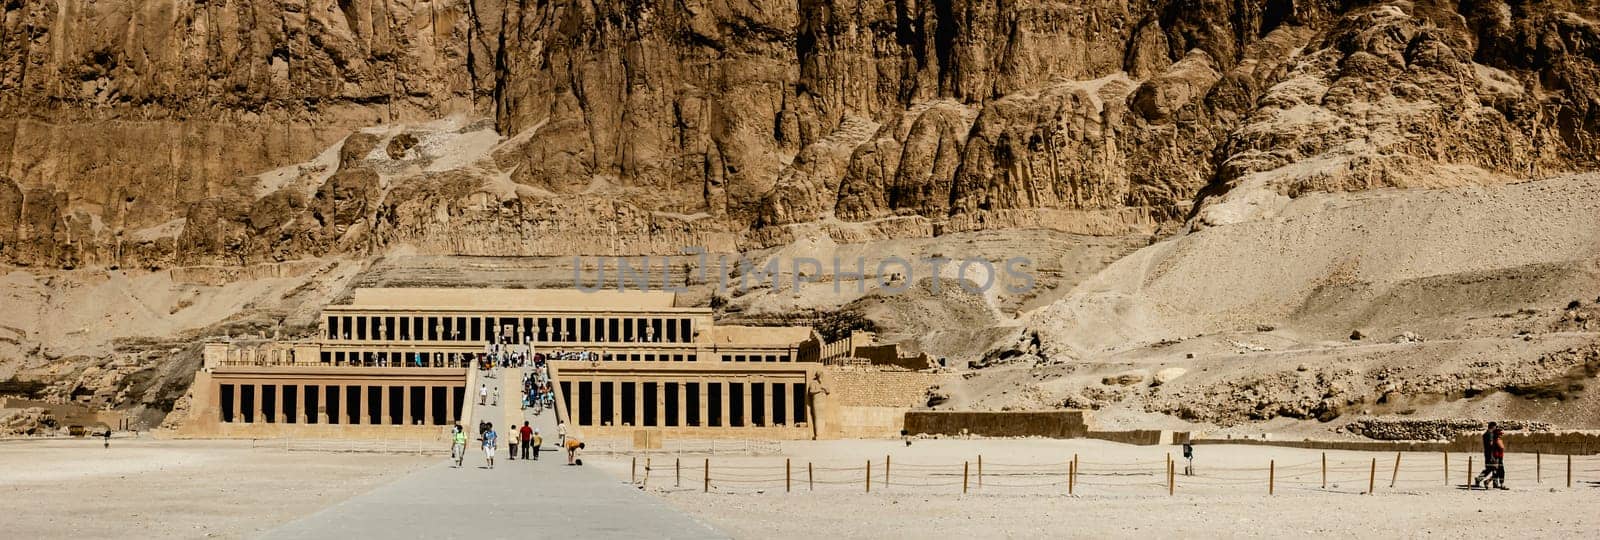 Tourists at Hatshepsut temple by Giamplume